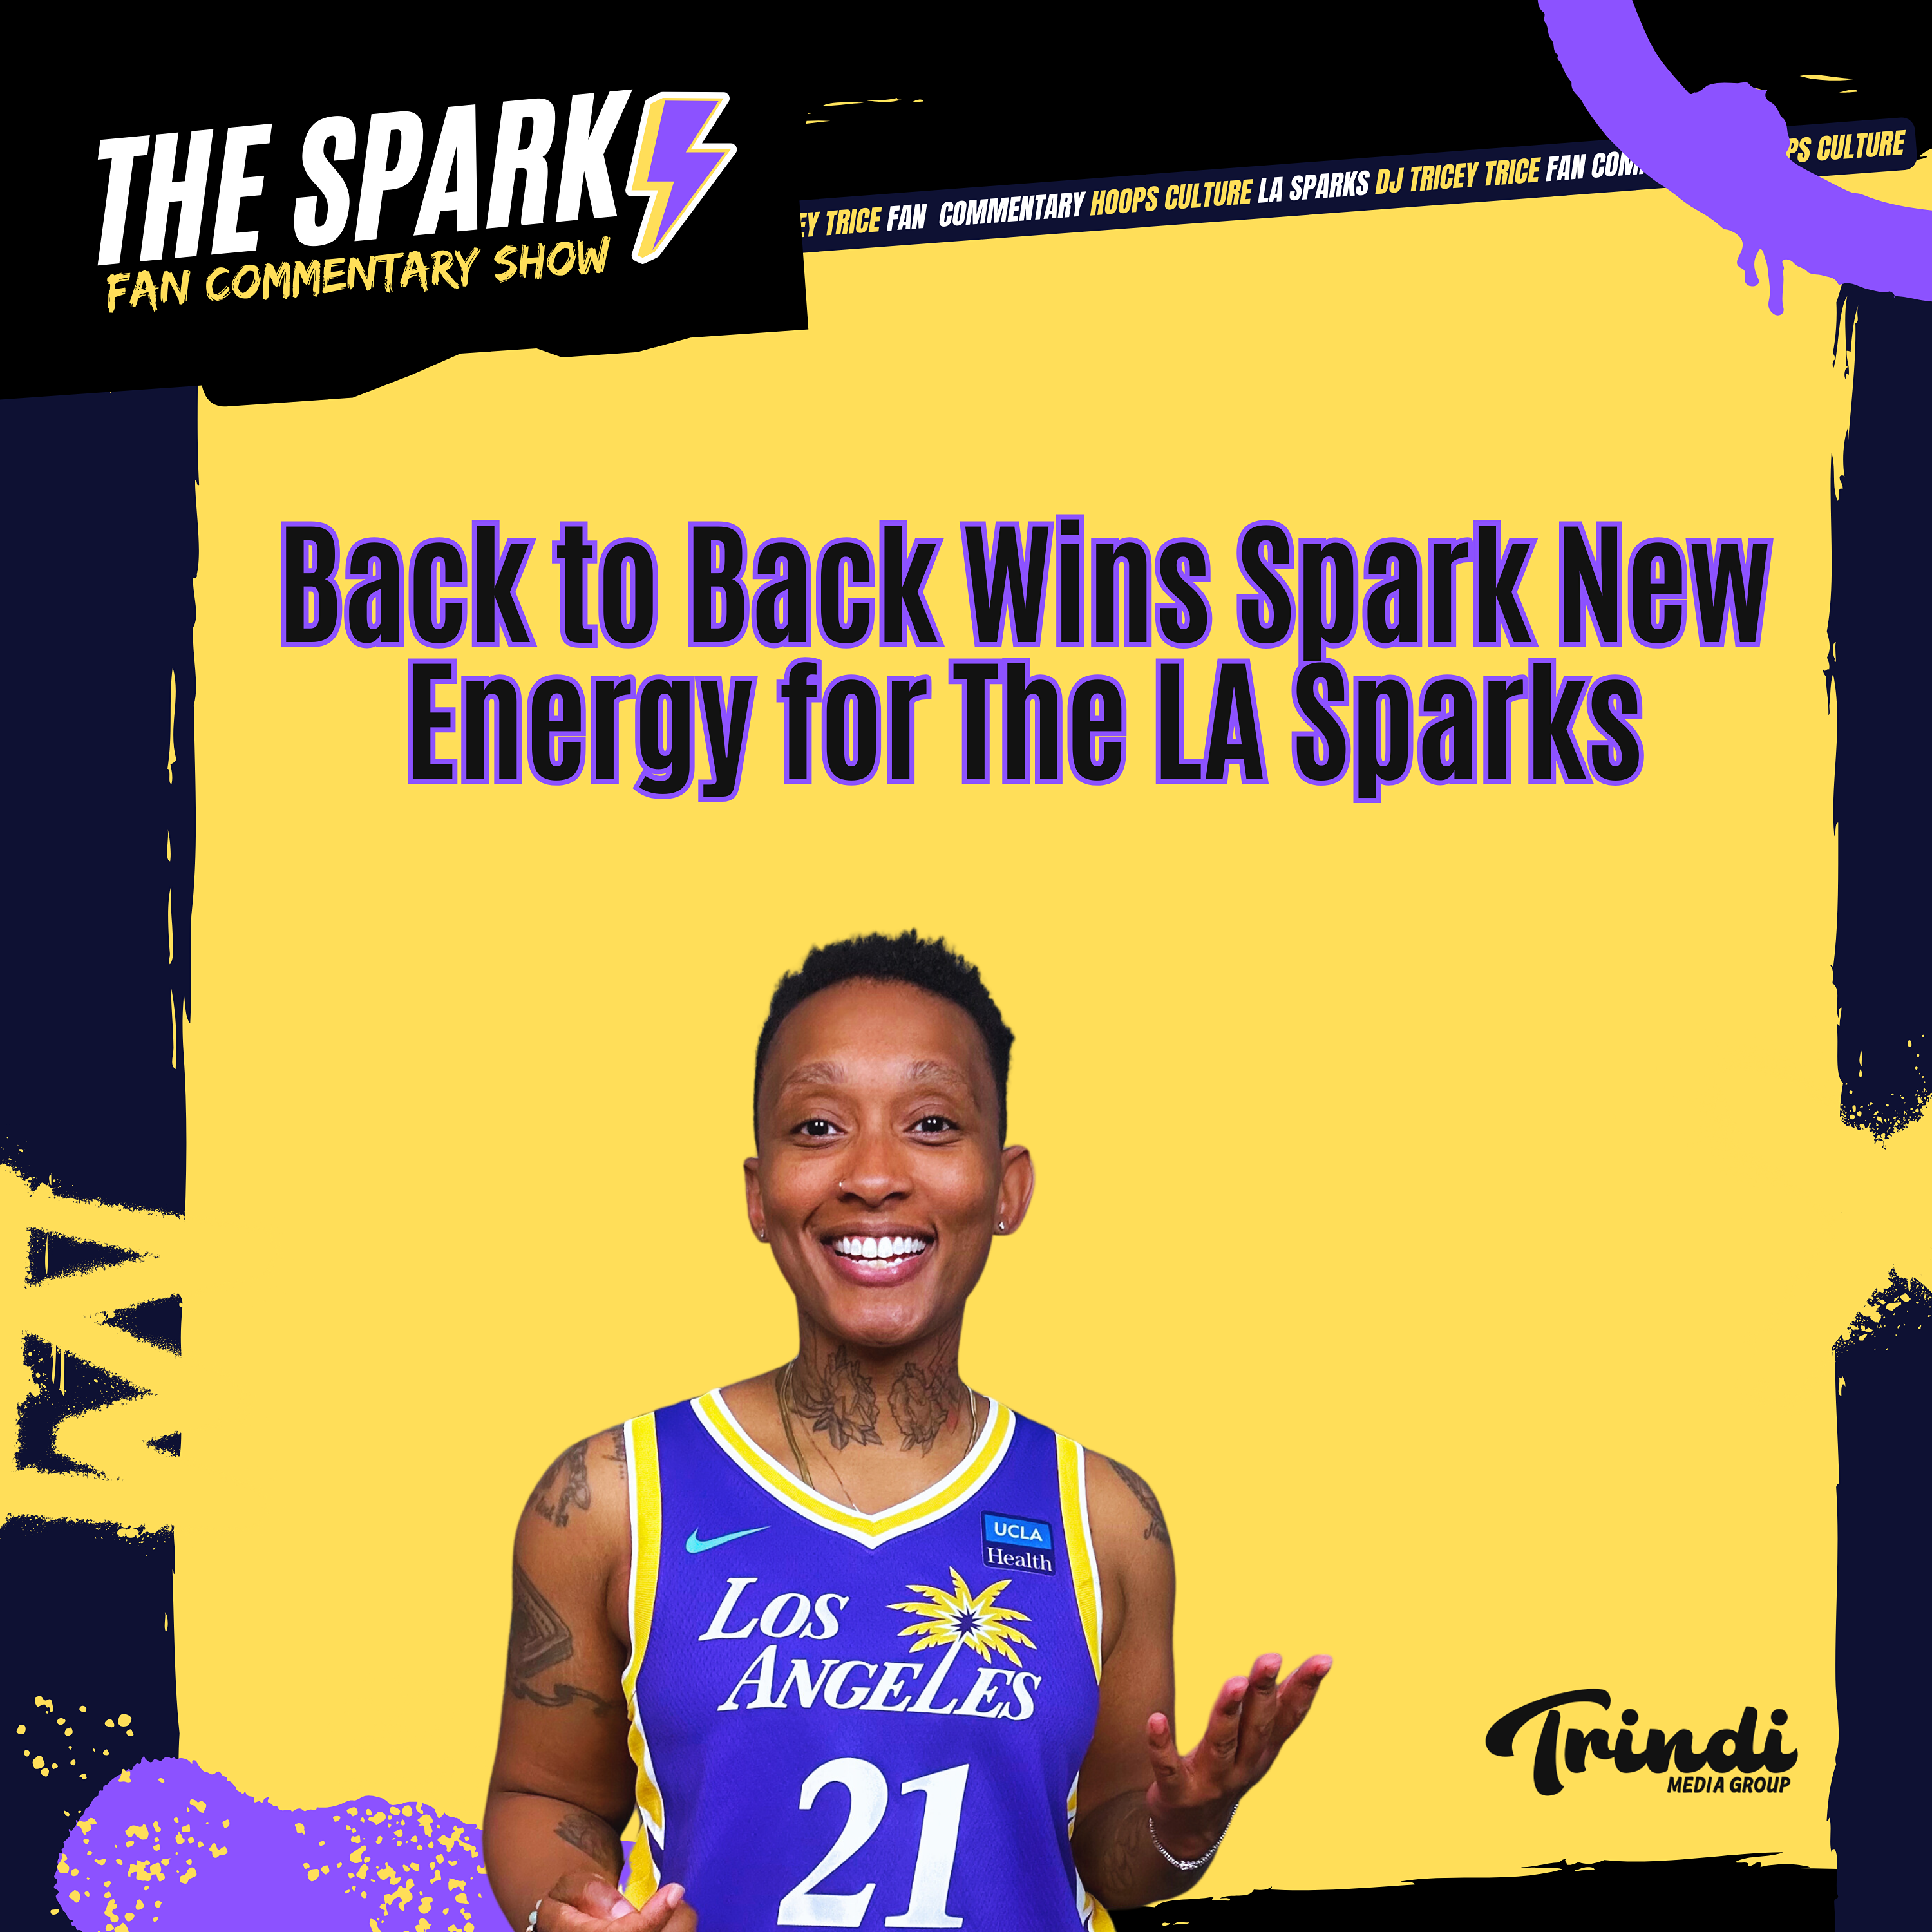 Back to Back Wins Spark New Energy for The LA Sparks